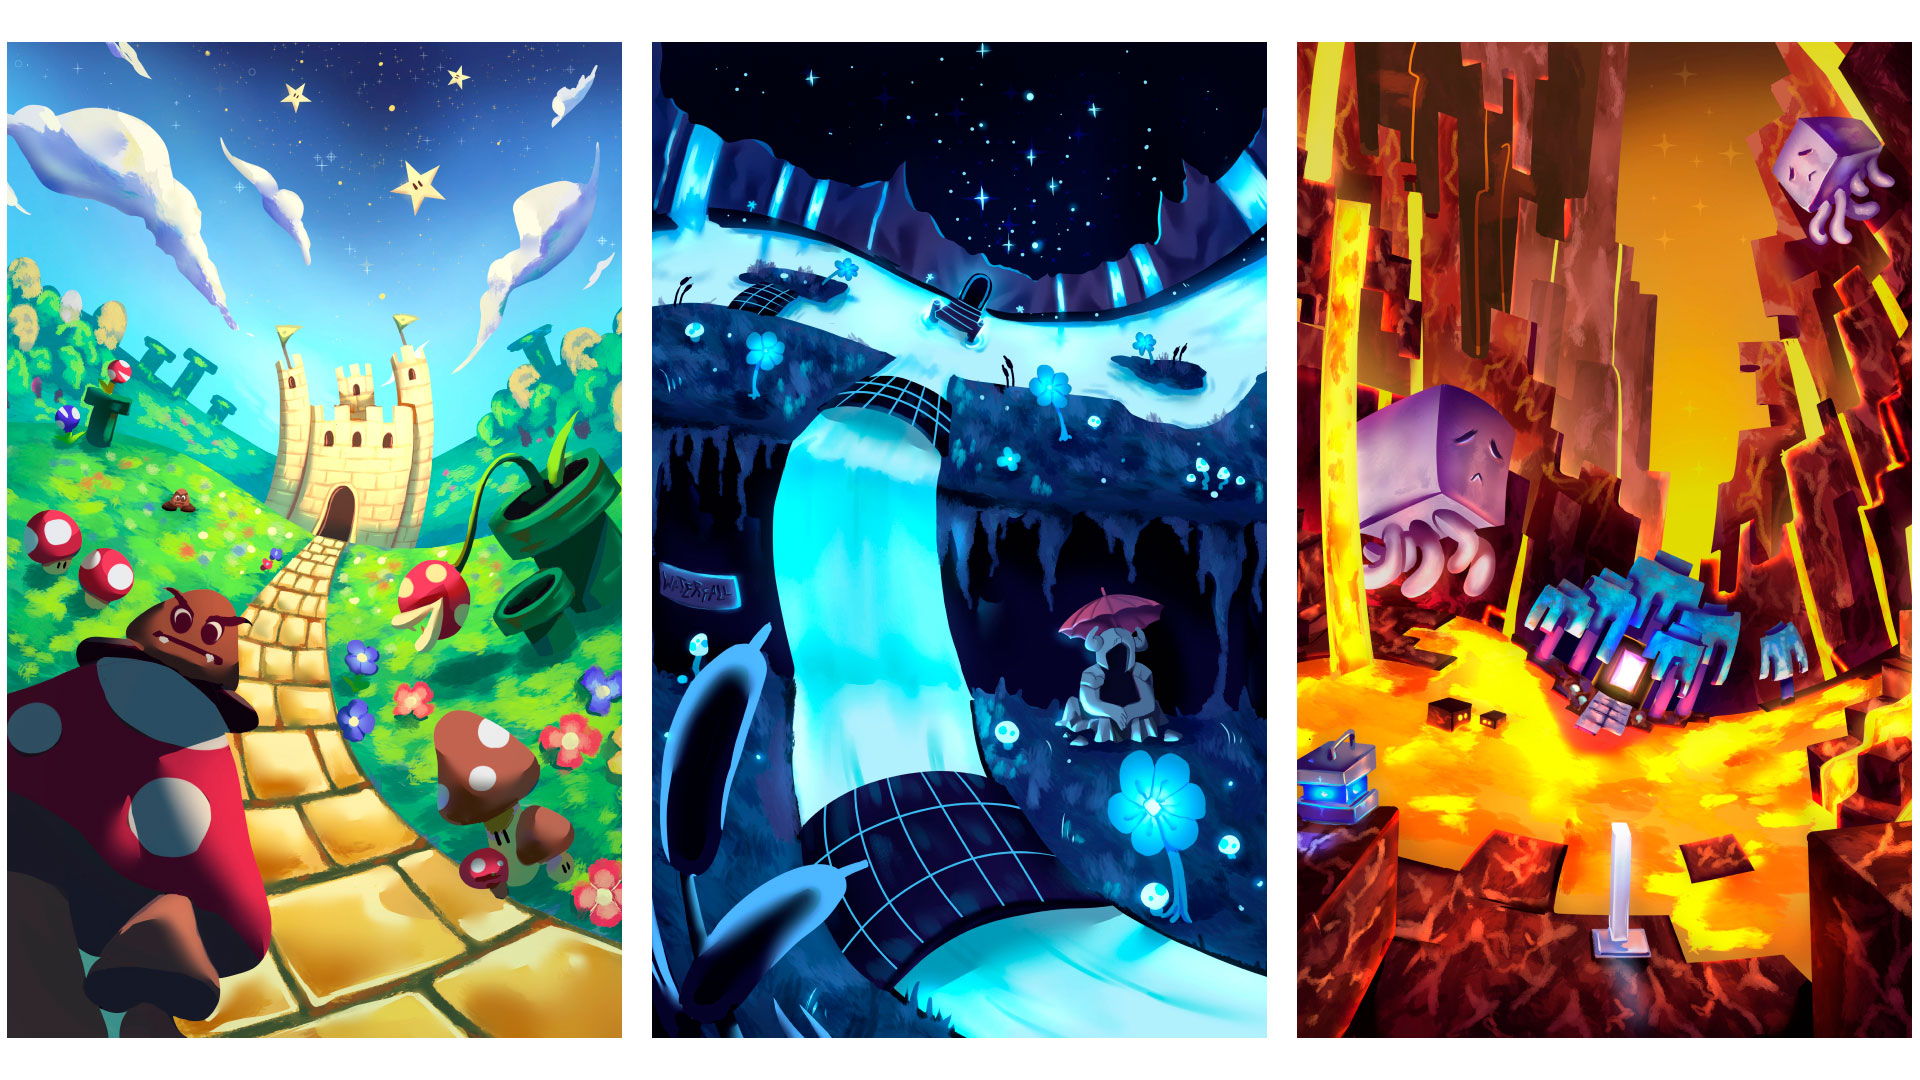 Three illustrations in a row with different environments that are connected by a portal. The illustration on the far left is a Super Mario Bros. landscape of the mushroom kingdom, with Peach’s castle in the background. The middle illustration is a landscape of Waterfall, which is a crystal water cave area in Undertale the game. The far-right illustration is from the dangerous lava area of the Nether in the game Minecraft.